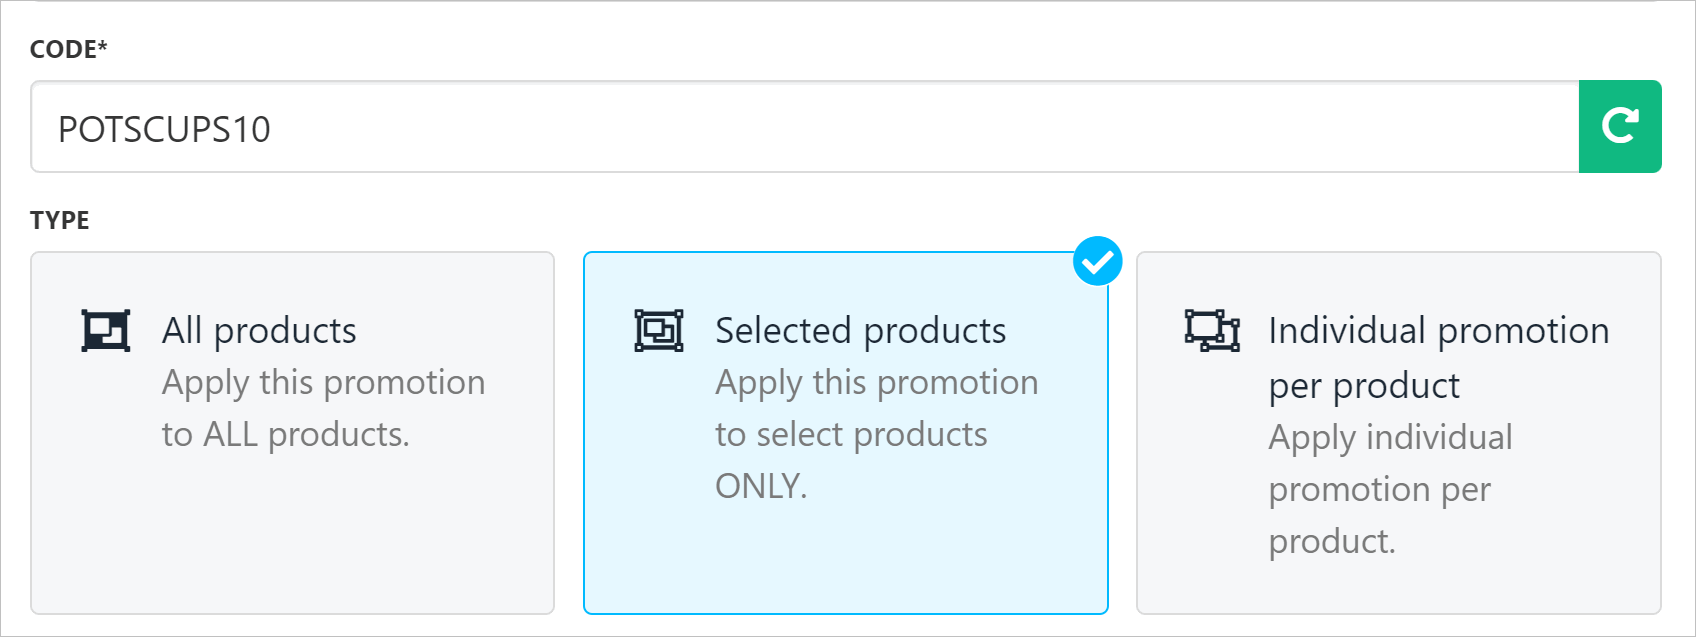 Choose Selected products